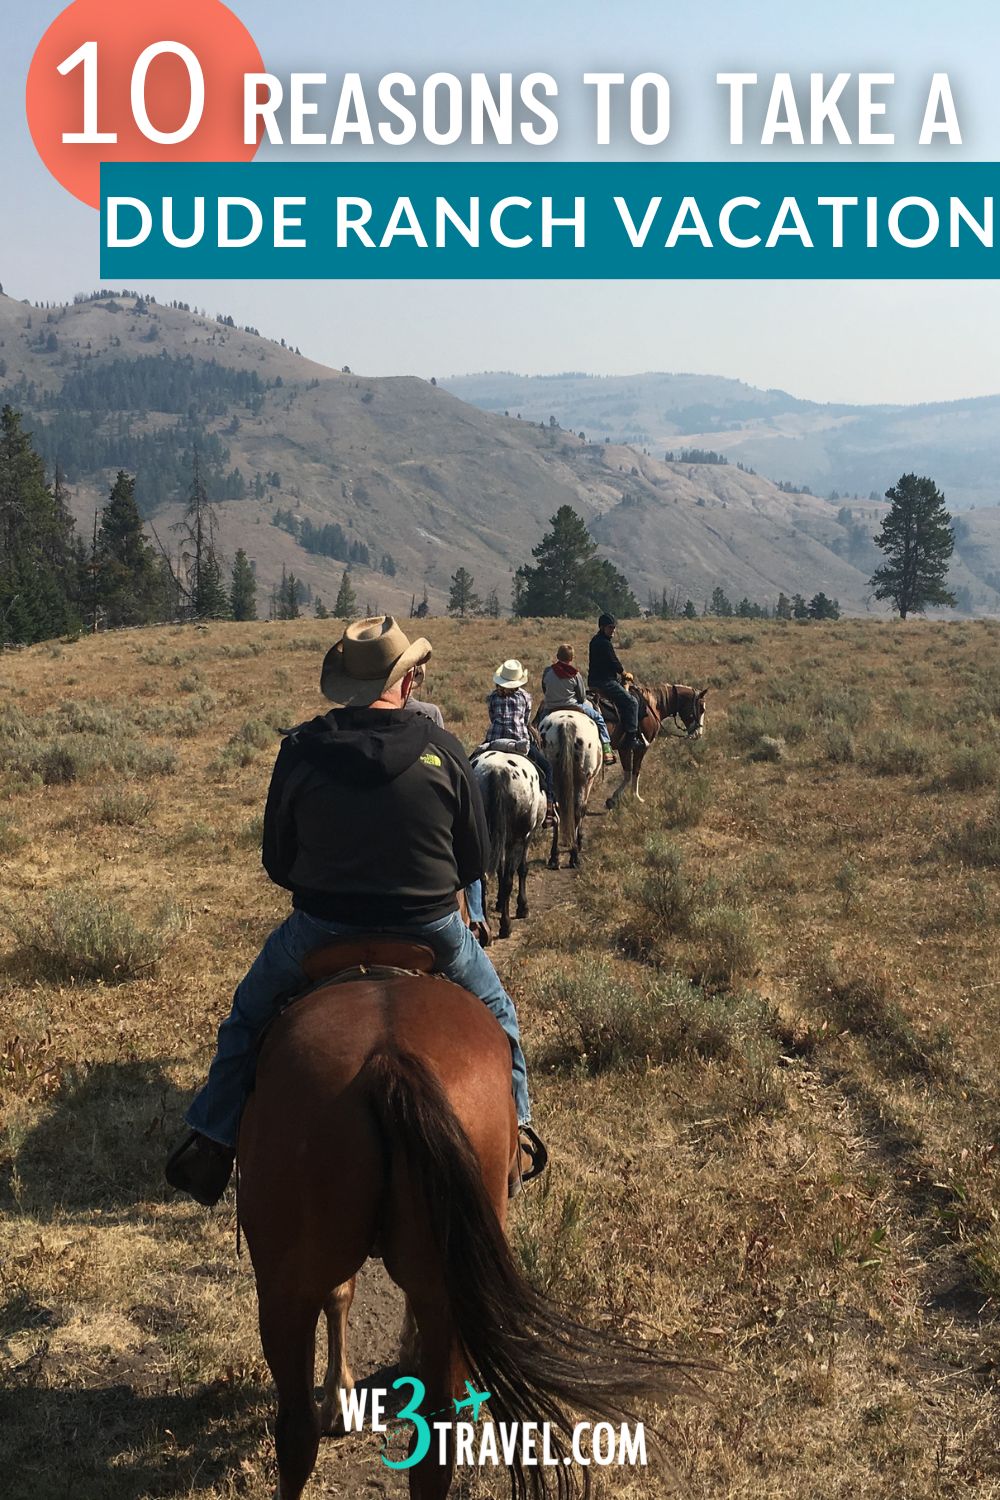 10 reasons to take a family dude ranch vacation